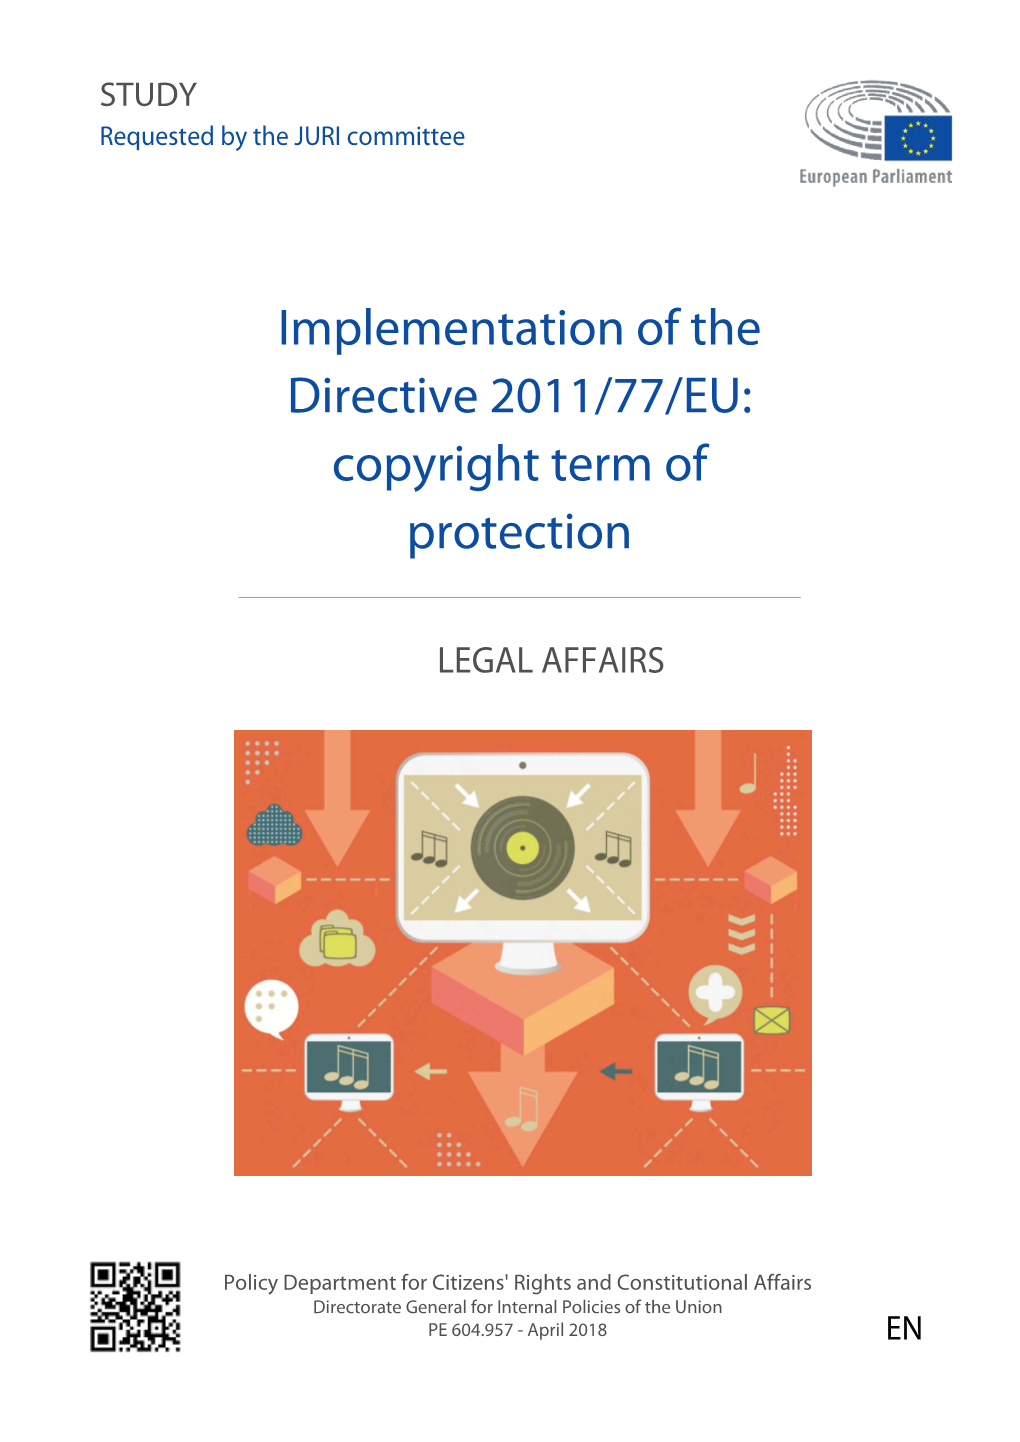 Implementation of the Directive 2011/77/EU: Copyright Term of Protection